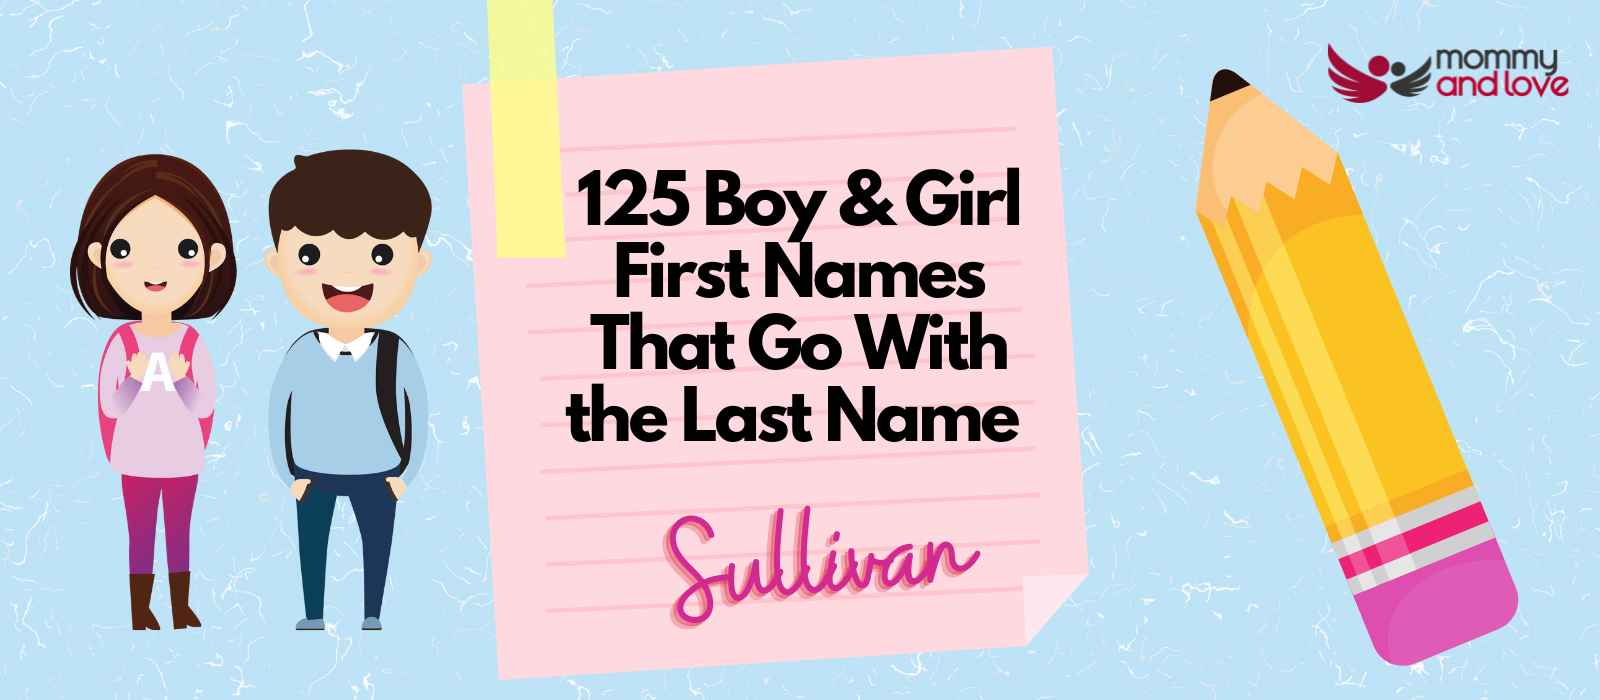 125 Boy & Girl First Names That Go With the Last Name Sullivan